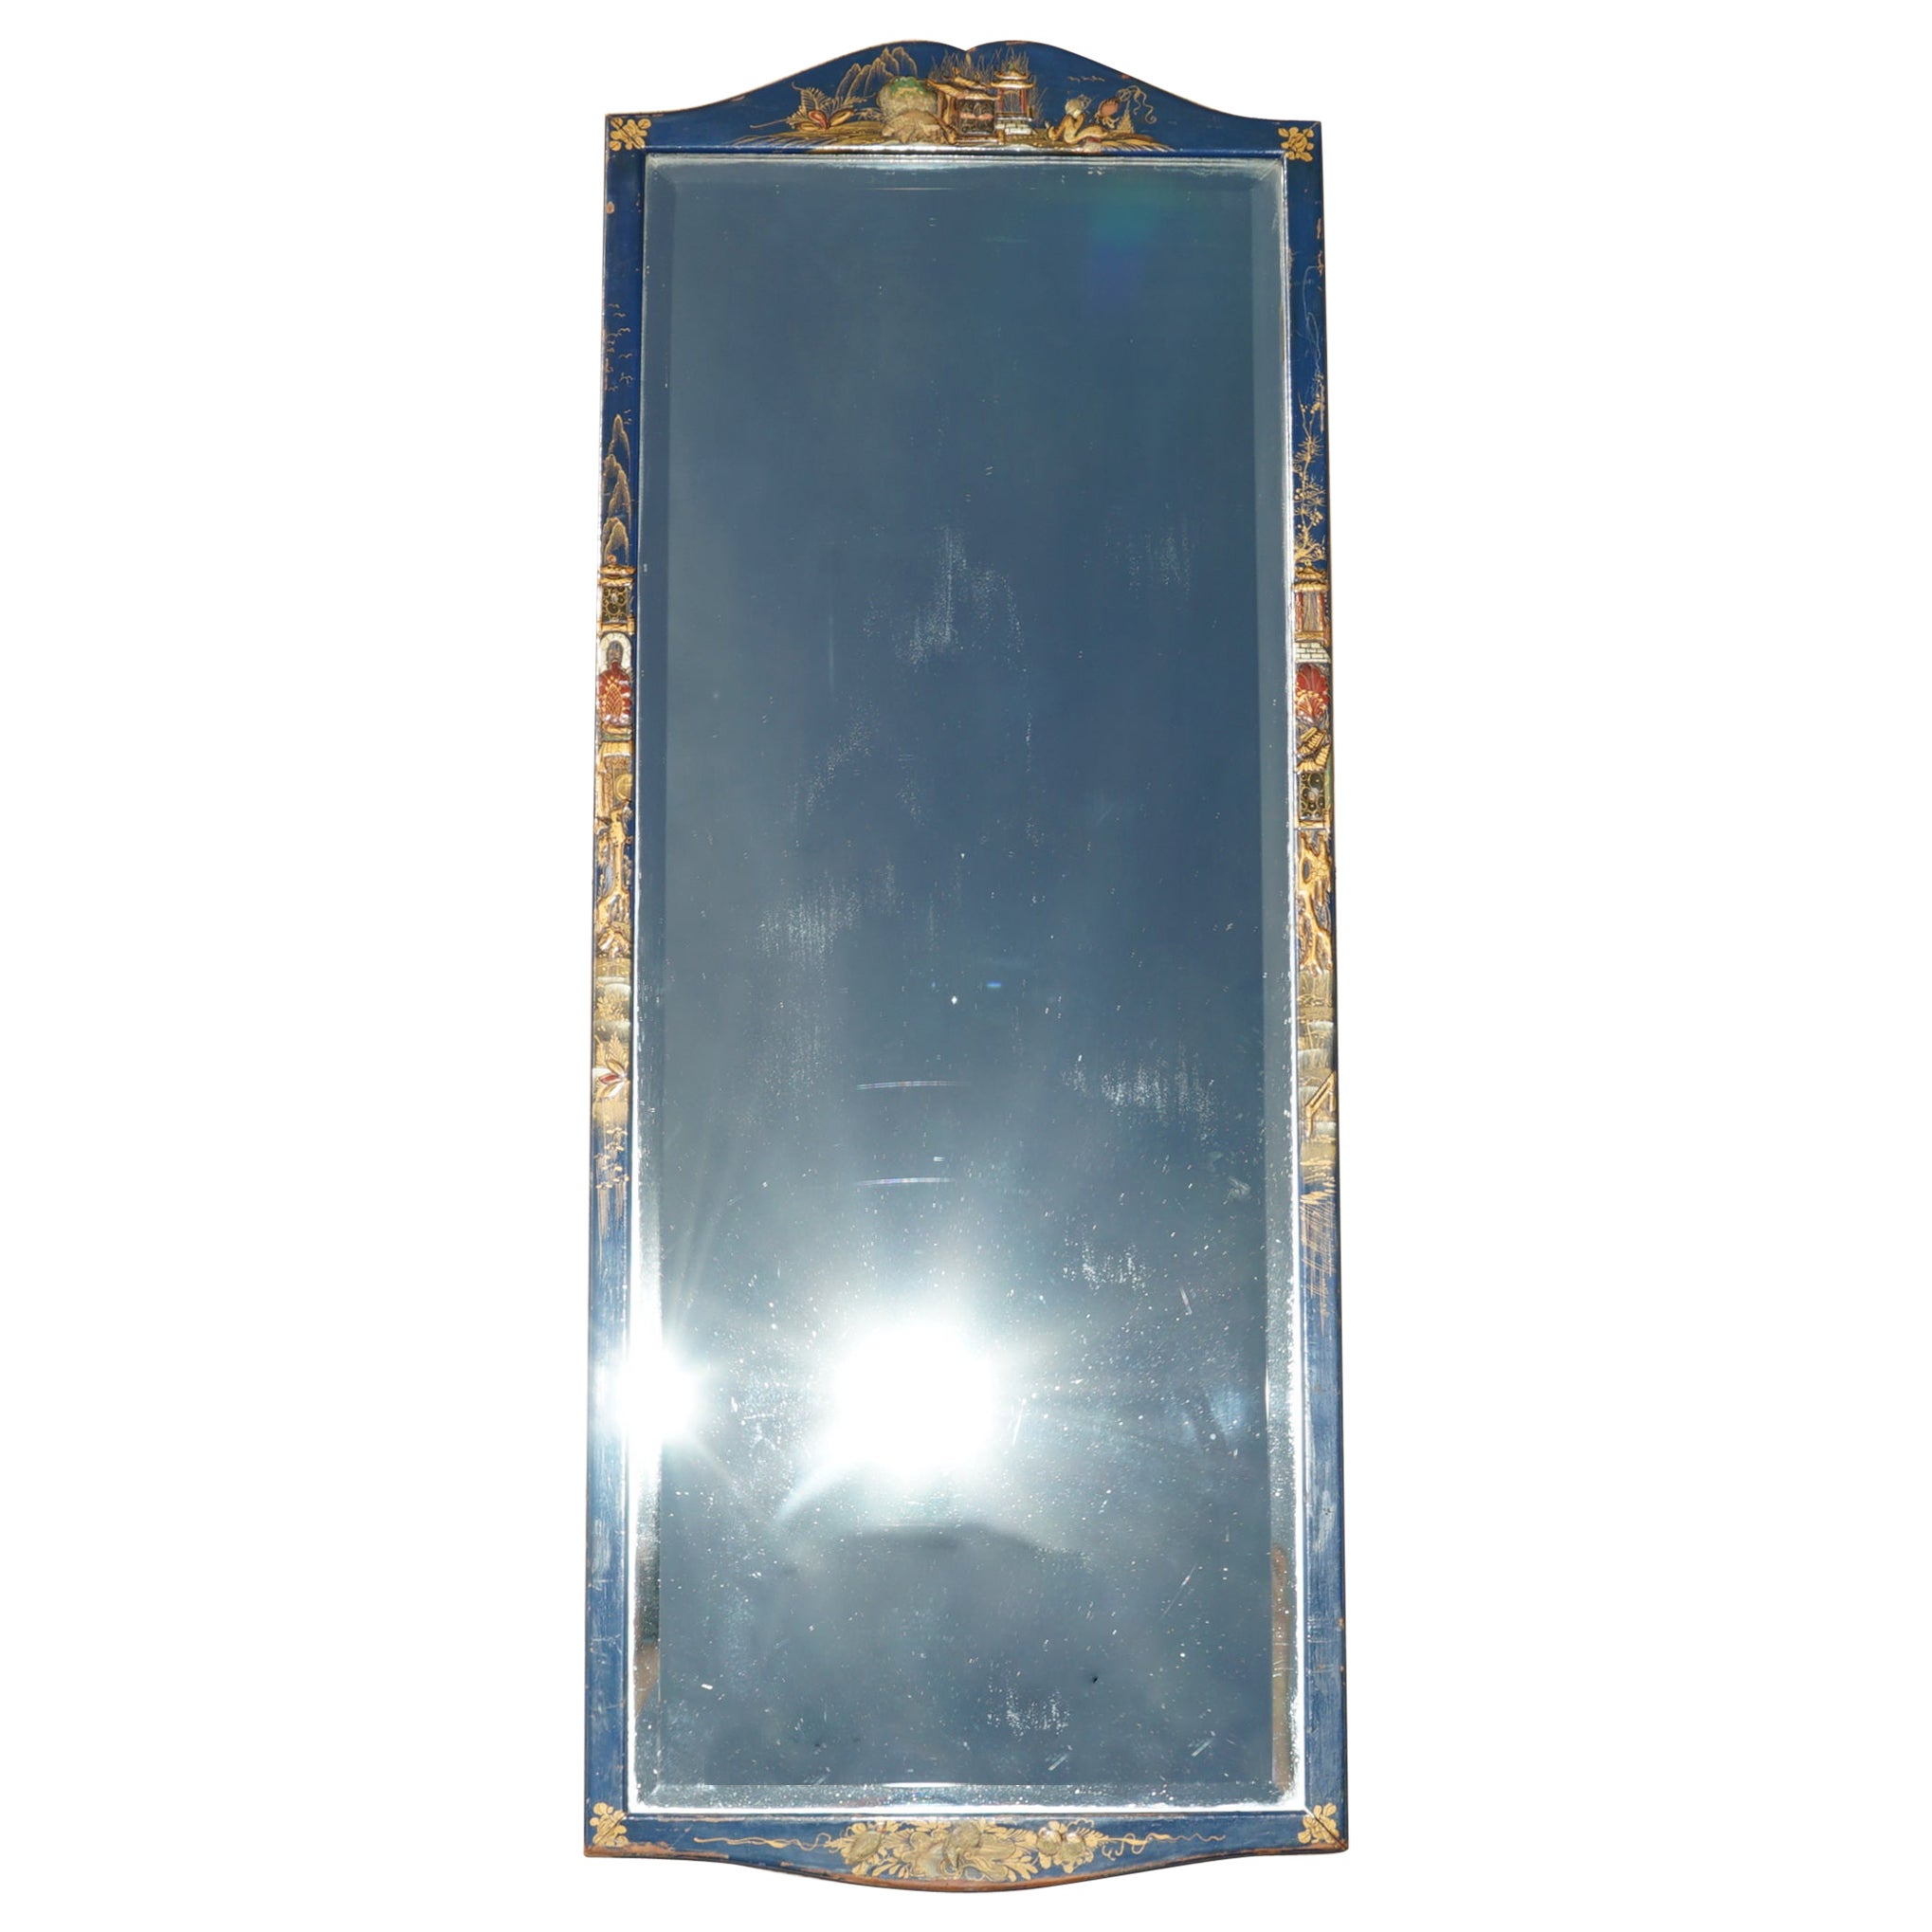 LOVELY ANTIQUE CHiNESE CHINOISERIE BLUE FRAMED MIRROR WITH ORNATE HAND PAINTINGS im Angebot